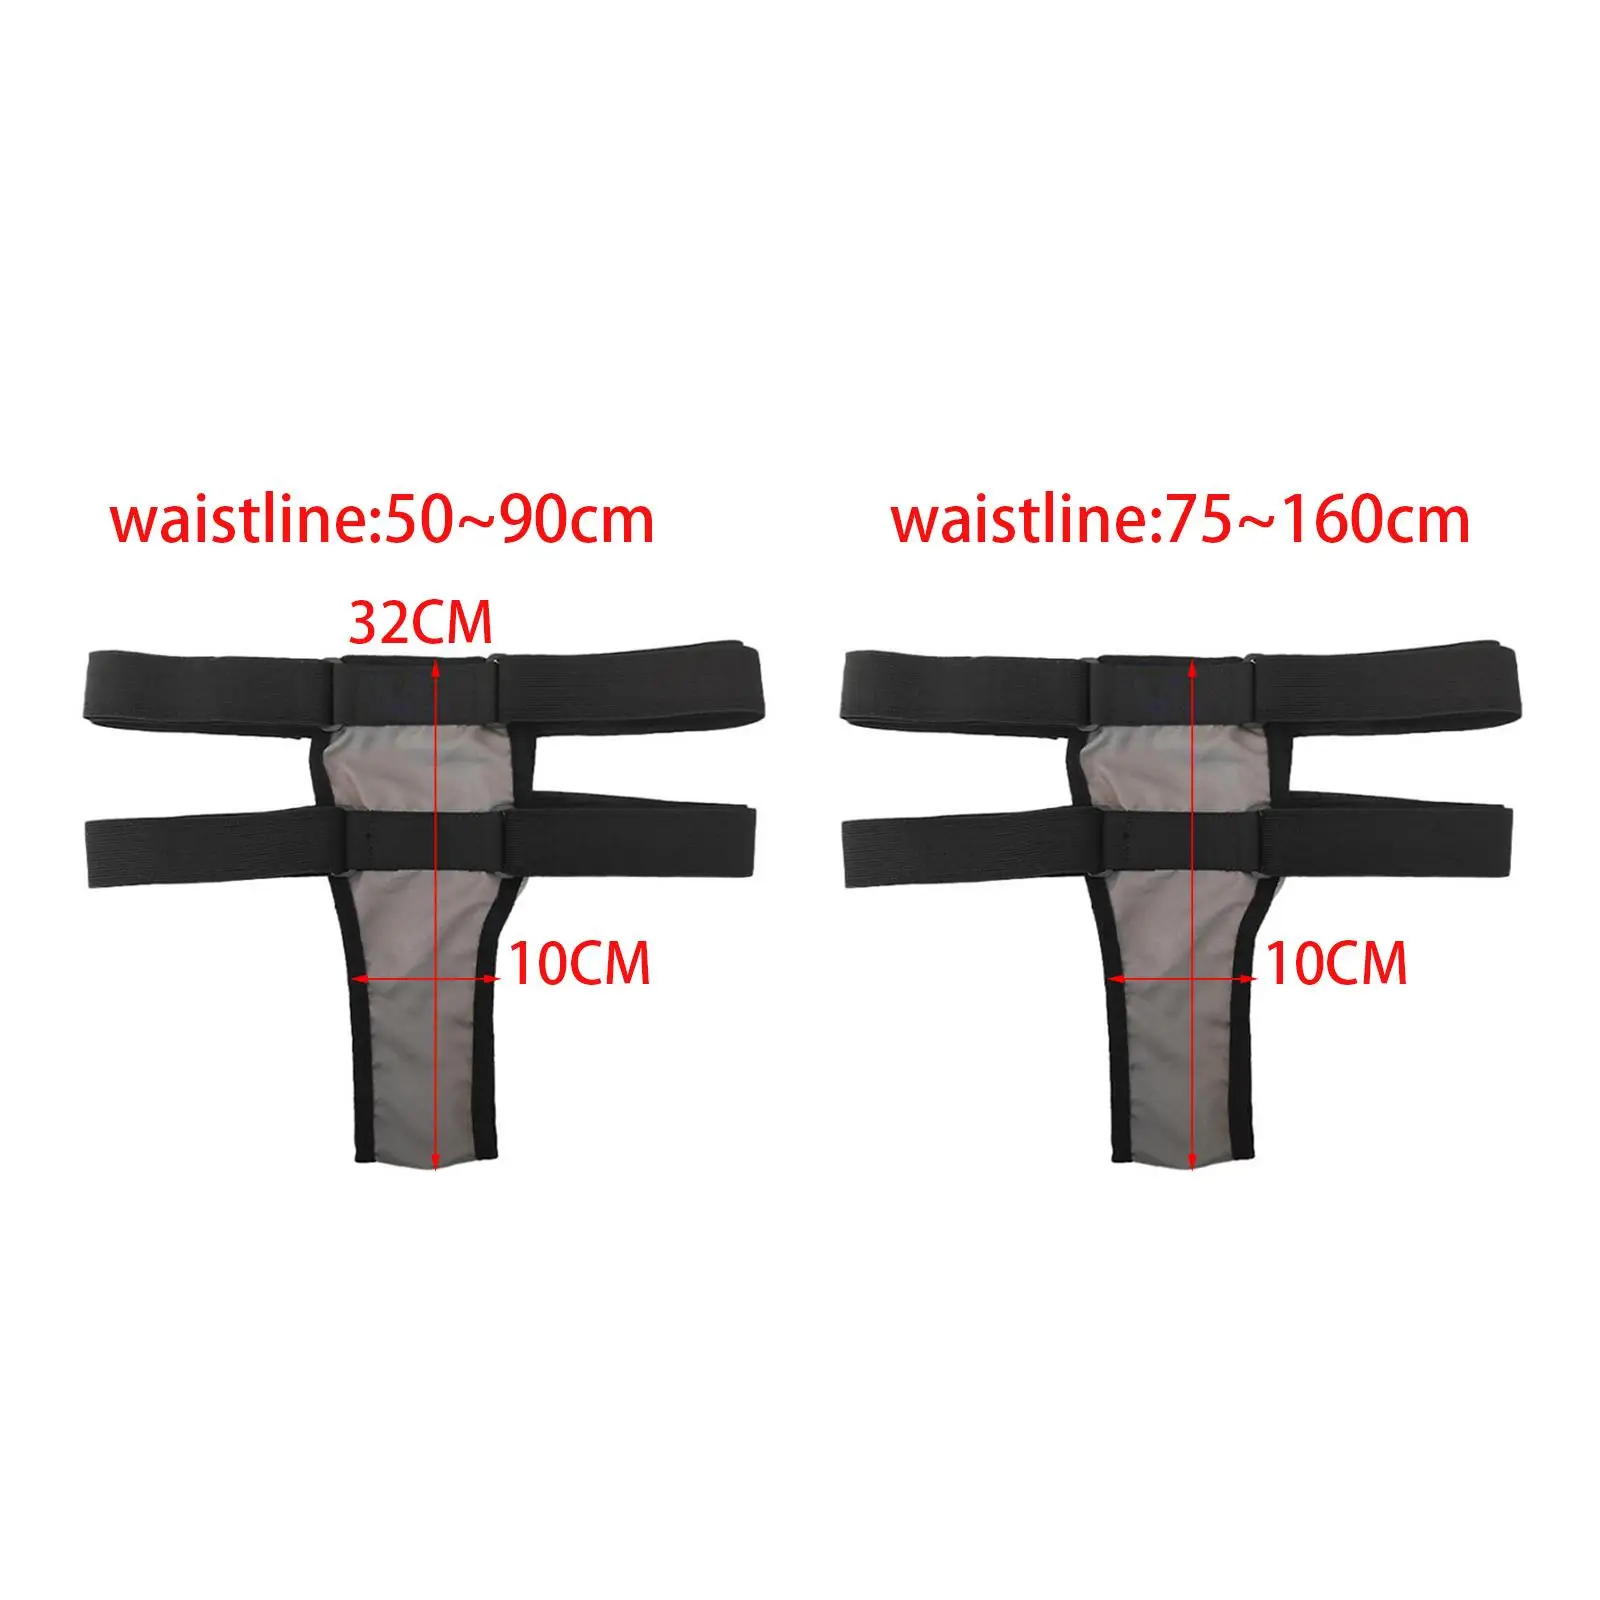 Pelvic Support Belt High Elasticity Recovery Black Uterus Support Girdle for Treating Postpartum Care Dysfunction Dropped Women